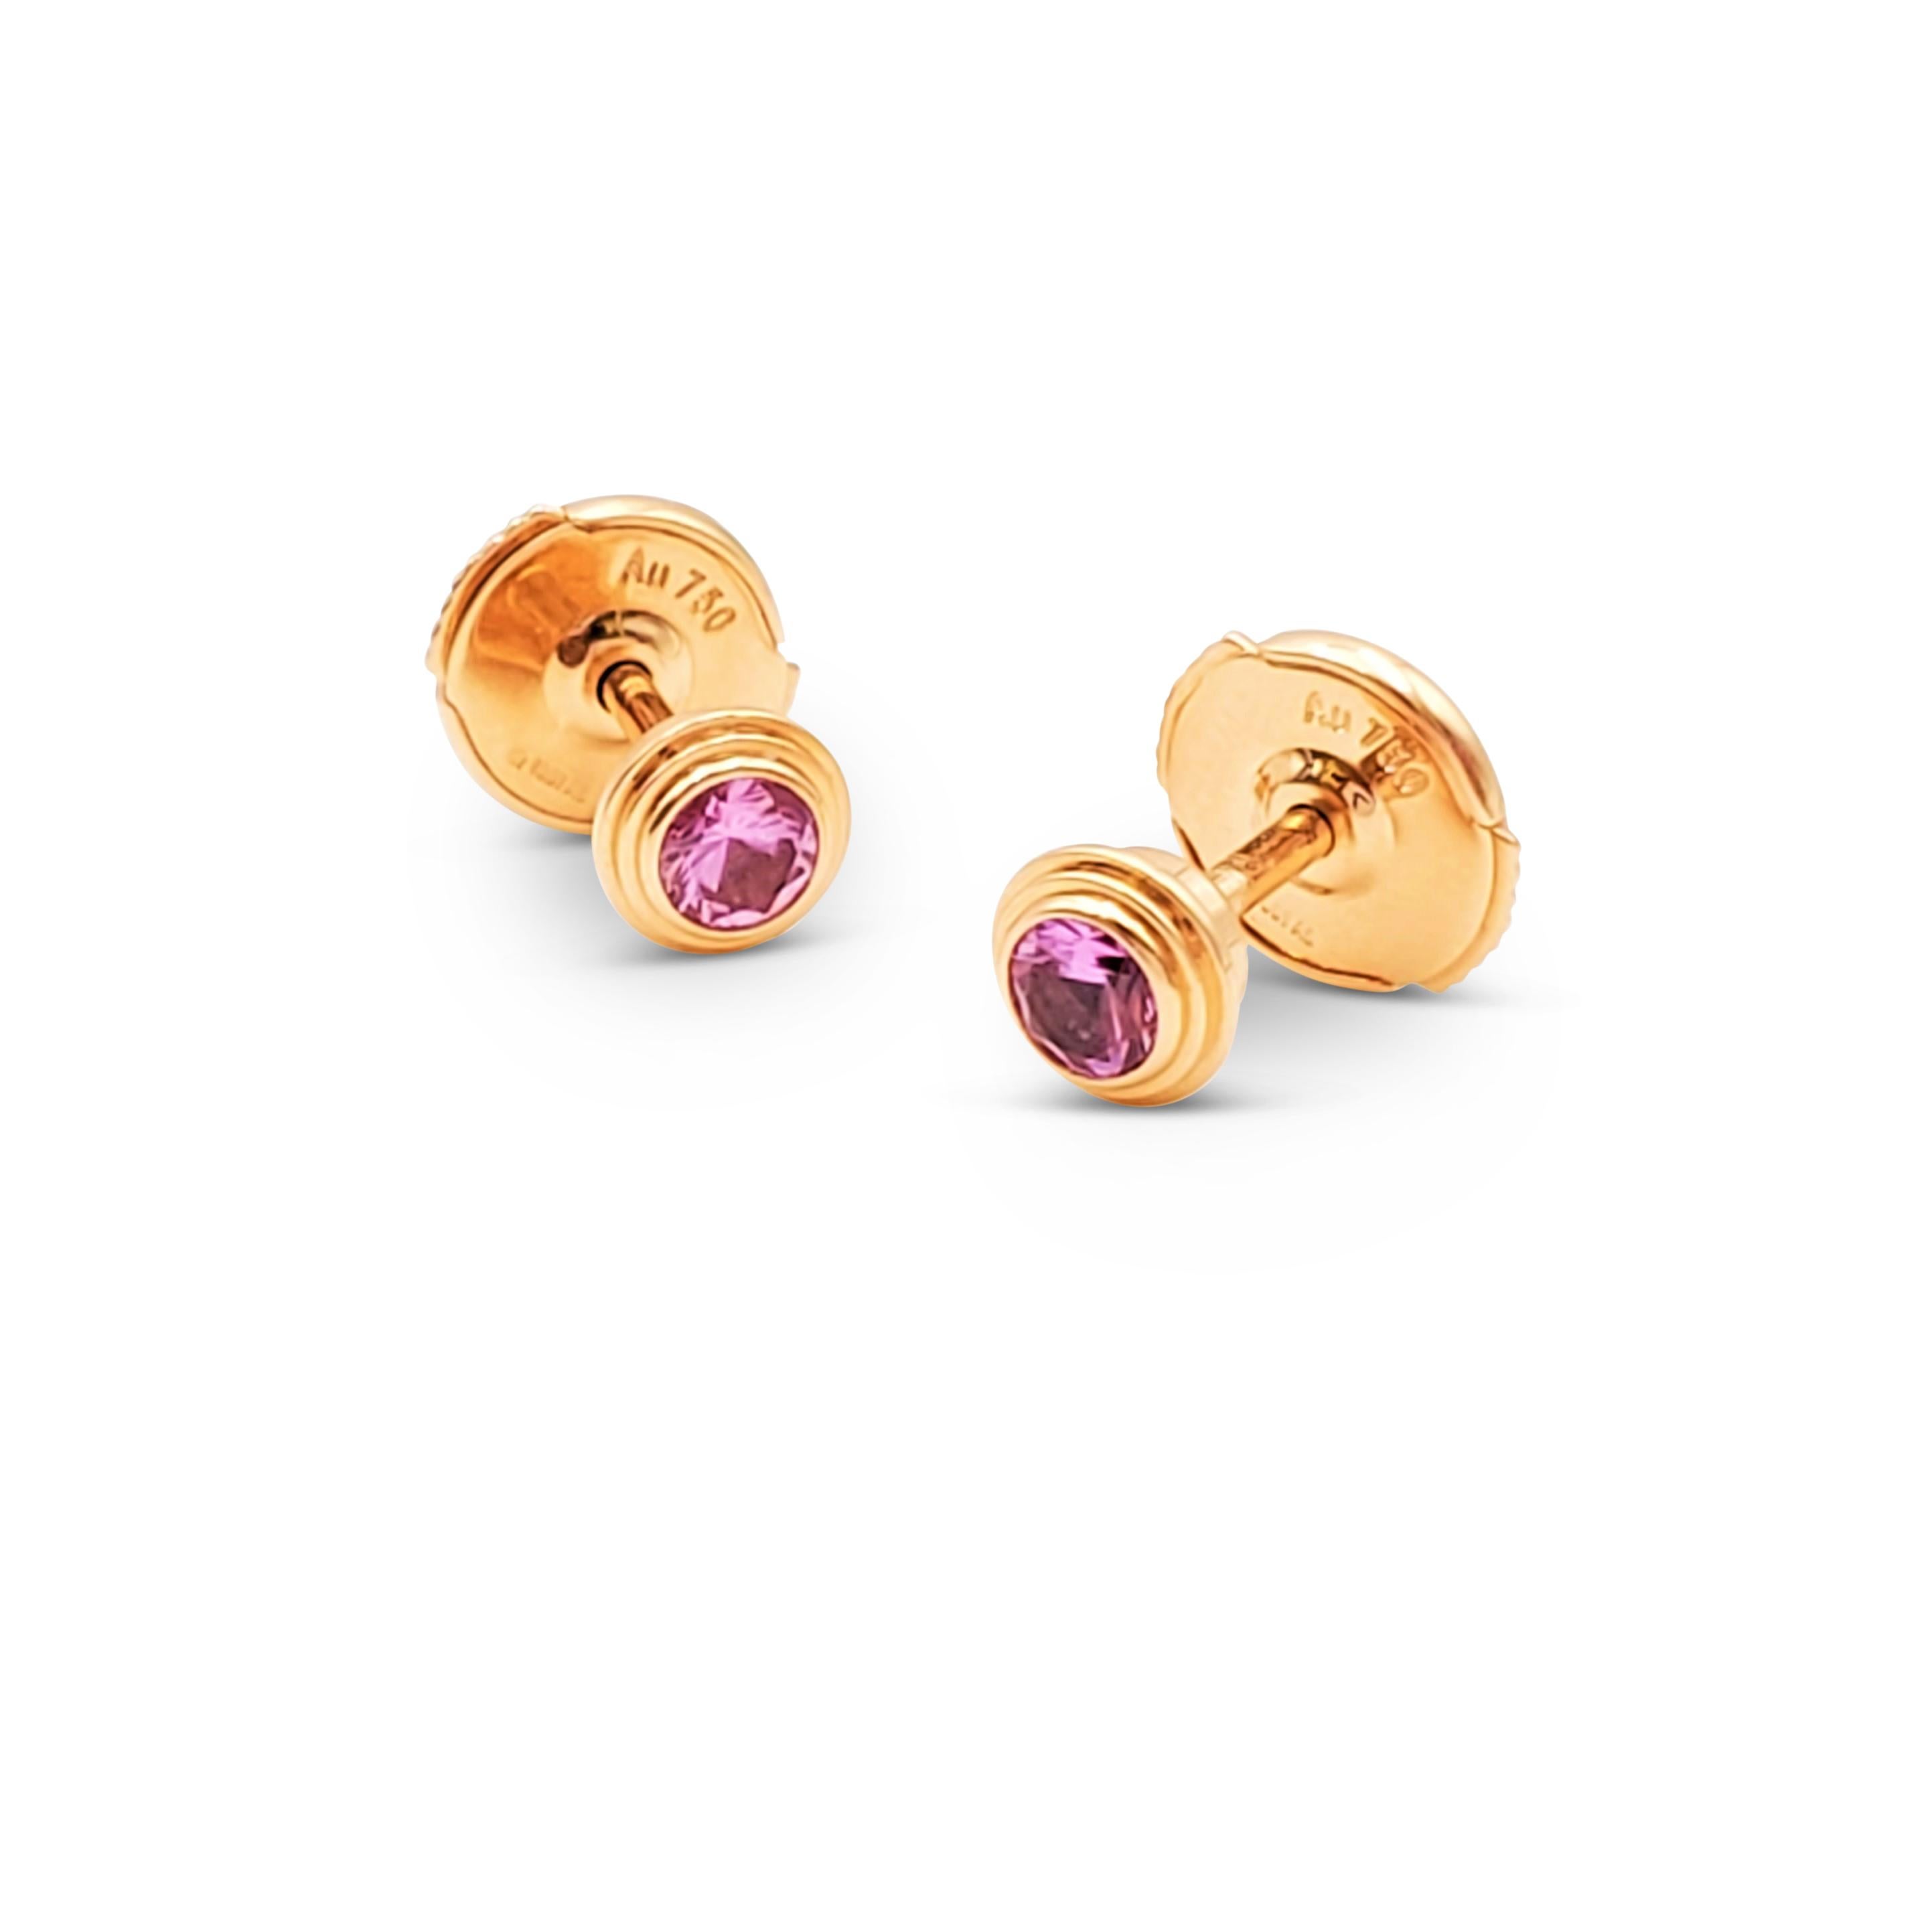 Authentic Cartier 'Saphirs Légers de Cartier' stud earrings crafted in 18 karat rose gold. Each earring features a vibrant pink sapphire stone held within a stacked bezel mounting. Signed Cartier, Au750, with serial number. The earrings are